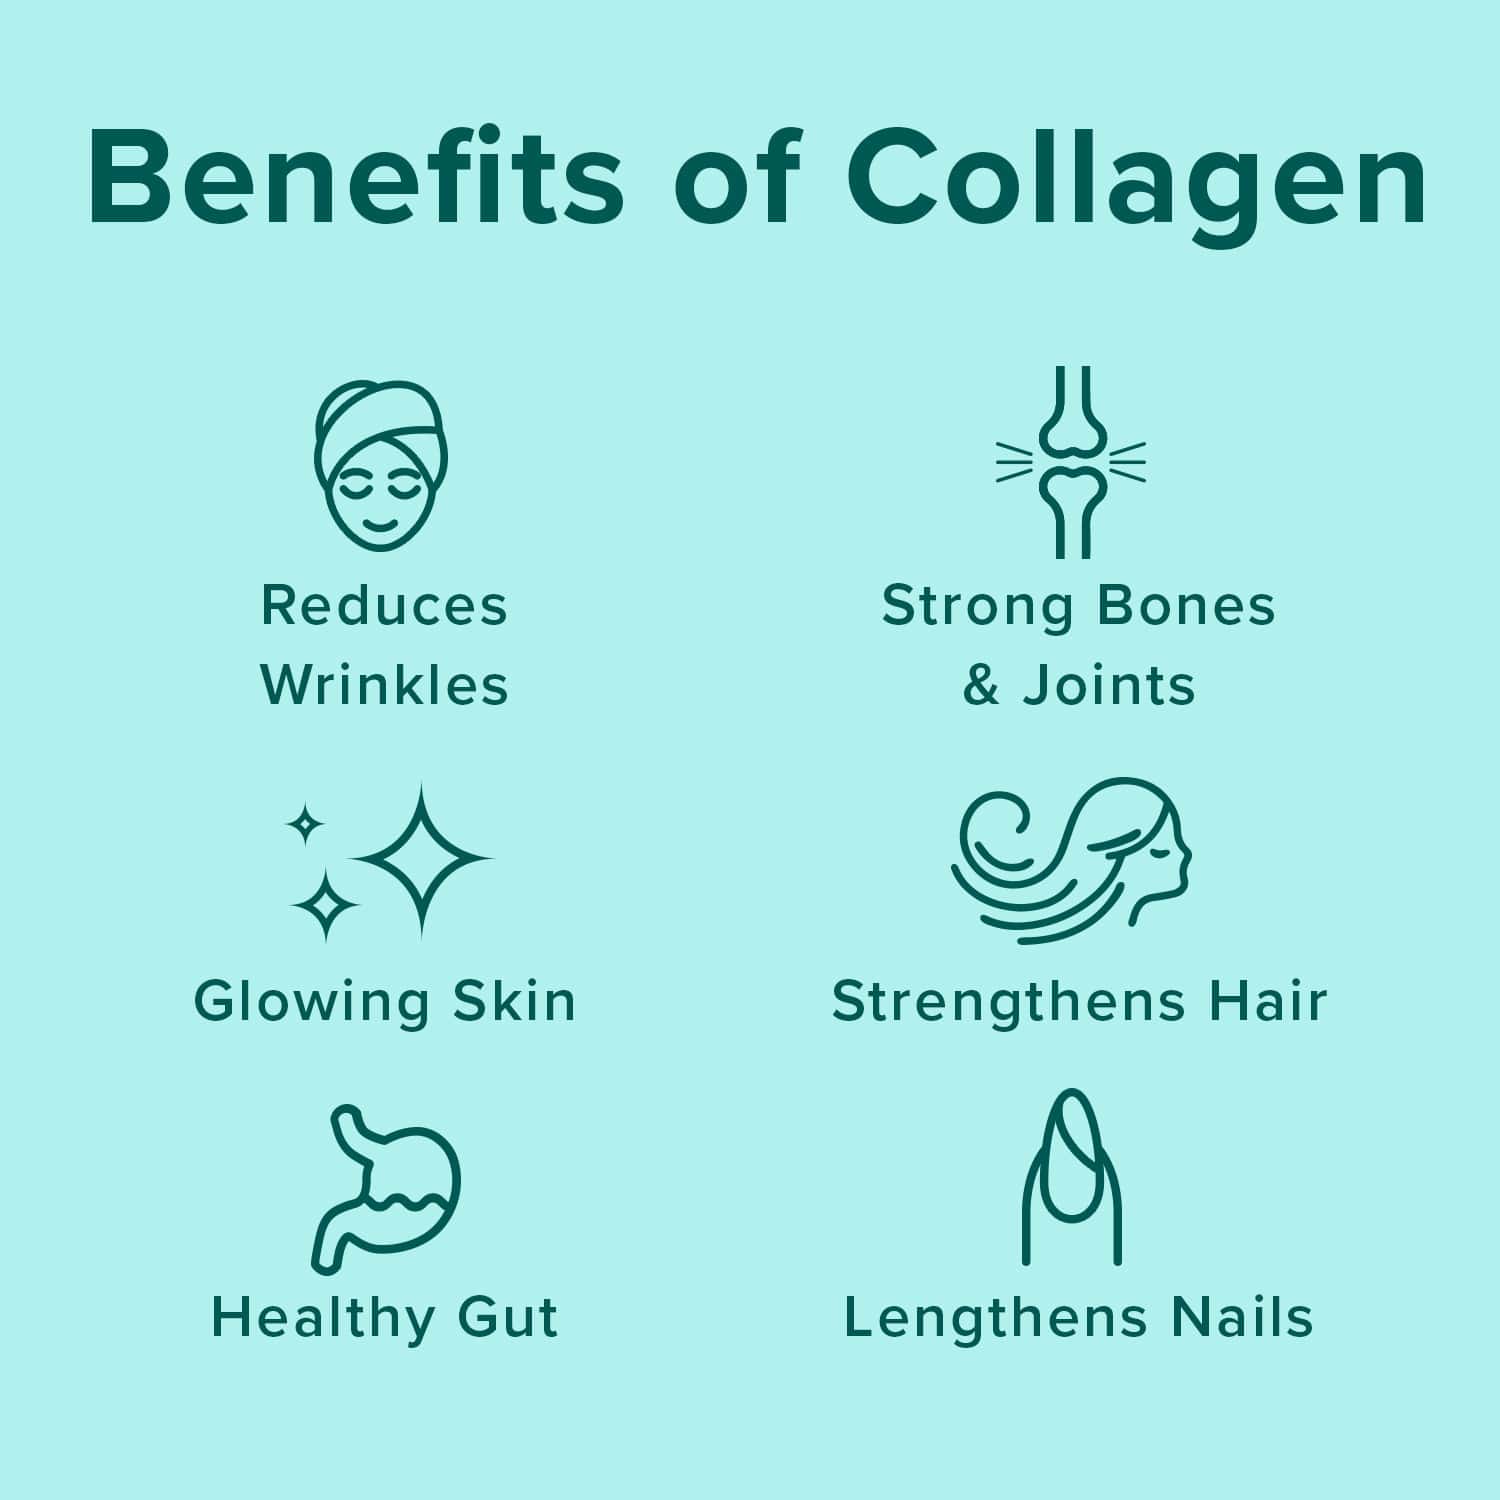 Benefits of Collagen - Reduces Wrinkles, Glowing Skin, Healthy Gut, Strong Bones & Joints, Strengthens Hair and Lengthens Nails